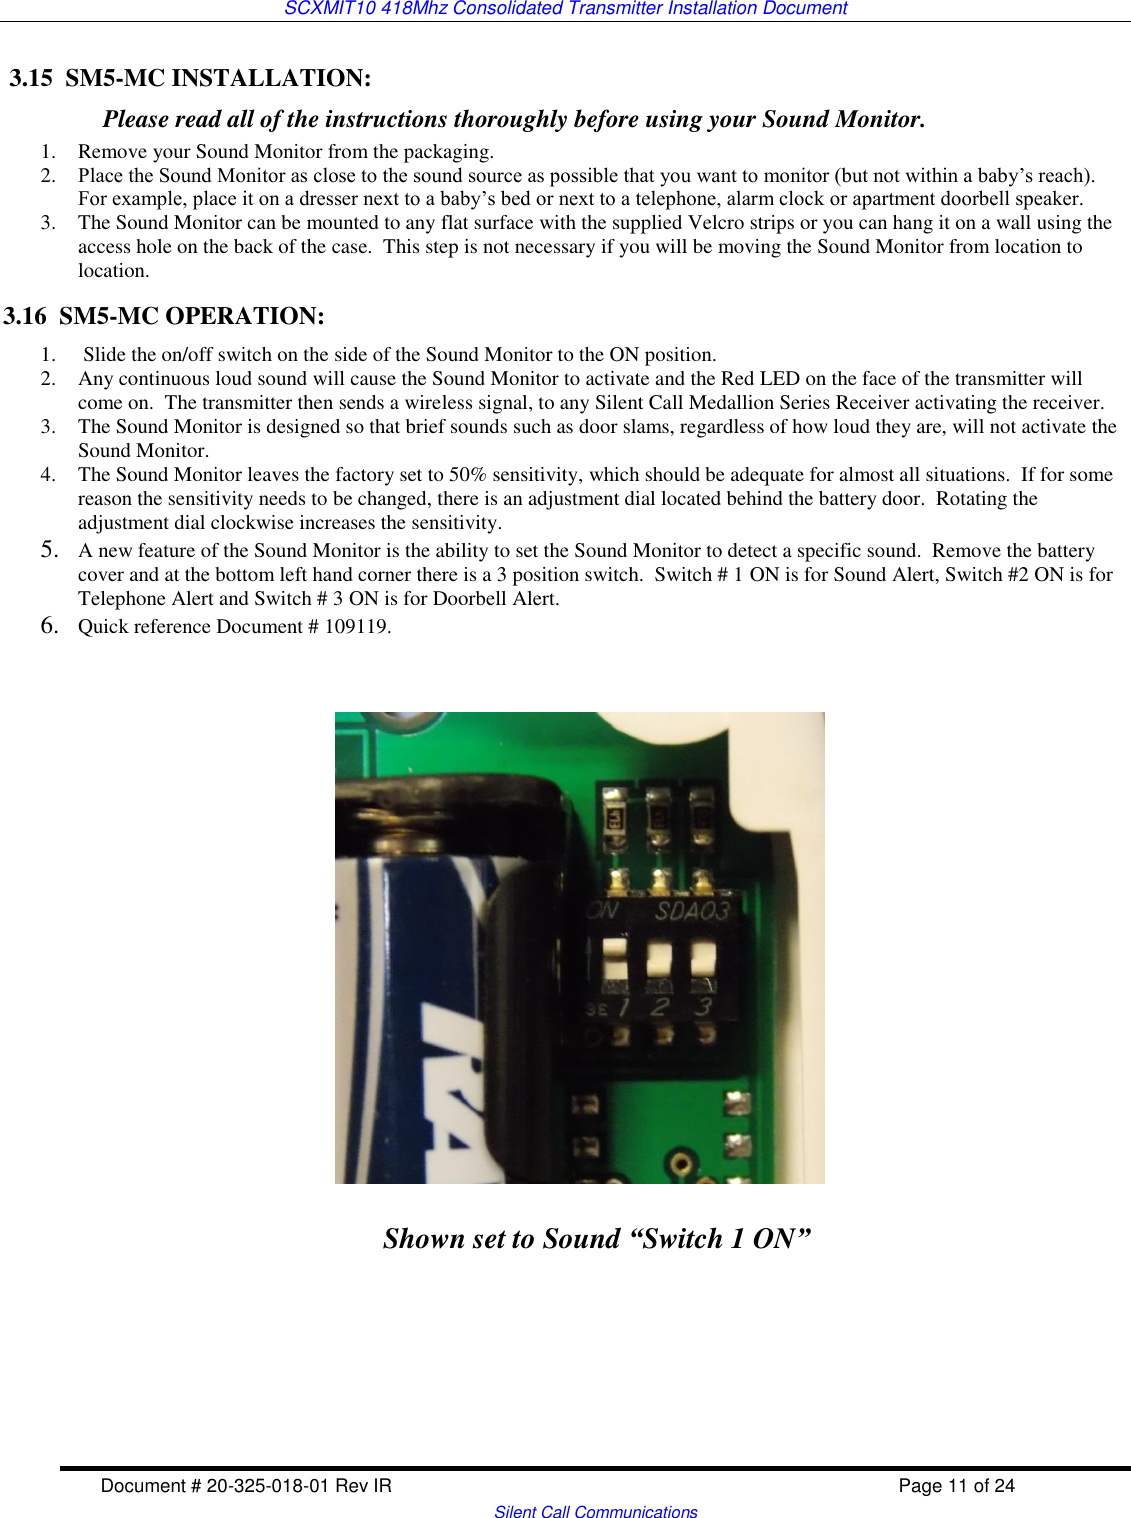 SCXMIT10 418Mhz Consolidated Transmitter Installation Document  Document # 20-325-018-01 Rev IR    Page 11 of 24   Silent Call Communications  3.15  SM5-MC INSTALLATION:           Please read all of the instructions thoroughly before using your Sound Monitor. 1. Remove your Sound Monitor from the packaging. 2. Place the Sound Monitor as close to the sound source as possible that you want to monitor (but not within a baby’s reach).  For example, place it on a dresser next to a baby’s bed or next to a telephone, alarm clock or apartment doorbell speaker.  3. The Sound Monitor can be mounted to any flat surface with the supplied Velcro strips or you can hang it on a wall using the access hole on the back of the case.  This step is not necessary if you will be moving the Sound Monitor from location to location. 3.16  SM5-MC OPERATION: 1.  Slide the on/off switch on the side of the Sound Monitor to the ON position. 2. Any continuous loud sound will cause the Sound Monitor to activate and the Red LED on the face of the transmitter will come on.  The transmitter then sends a wireless signal, to any Silent Call Medallion Series Receiver activating the receiver. 3. The Sound Monitor is designed so that brief sounds such as door slams, regardless of how loud they are, will not activate the Sound Monitor.   4. The Sound Monitor leaves the factory set to 50% sensitivity, which should be adequate for almost all situations.  If for some reason the sensitivity needs to be changed, there is an adjustment dial located behind the battery door.  Rotating the adjustment dial clockwise increases the sensitivity.    5. A new feature of the Sound Monitor is the ability to set the Sound Monitor to detect a specific sound.  Remove the battery cover and at the bottom left hand corner there is a 3 position switch.  Switch # 1 ON is for Sound Alert, Switch #2 ON is for Telephone Alert and Switch # 3 ON is for Doorbell Alert. 6. Quick reference Document # 109119.         Shown set to Sound “Switch 1 ON” 